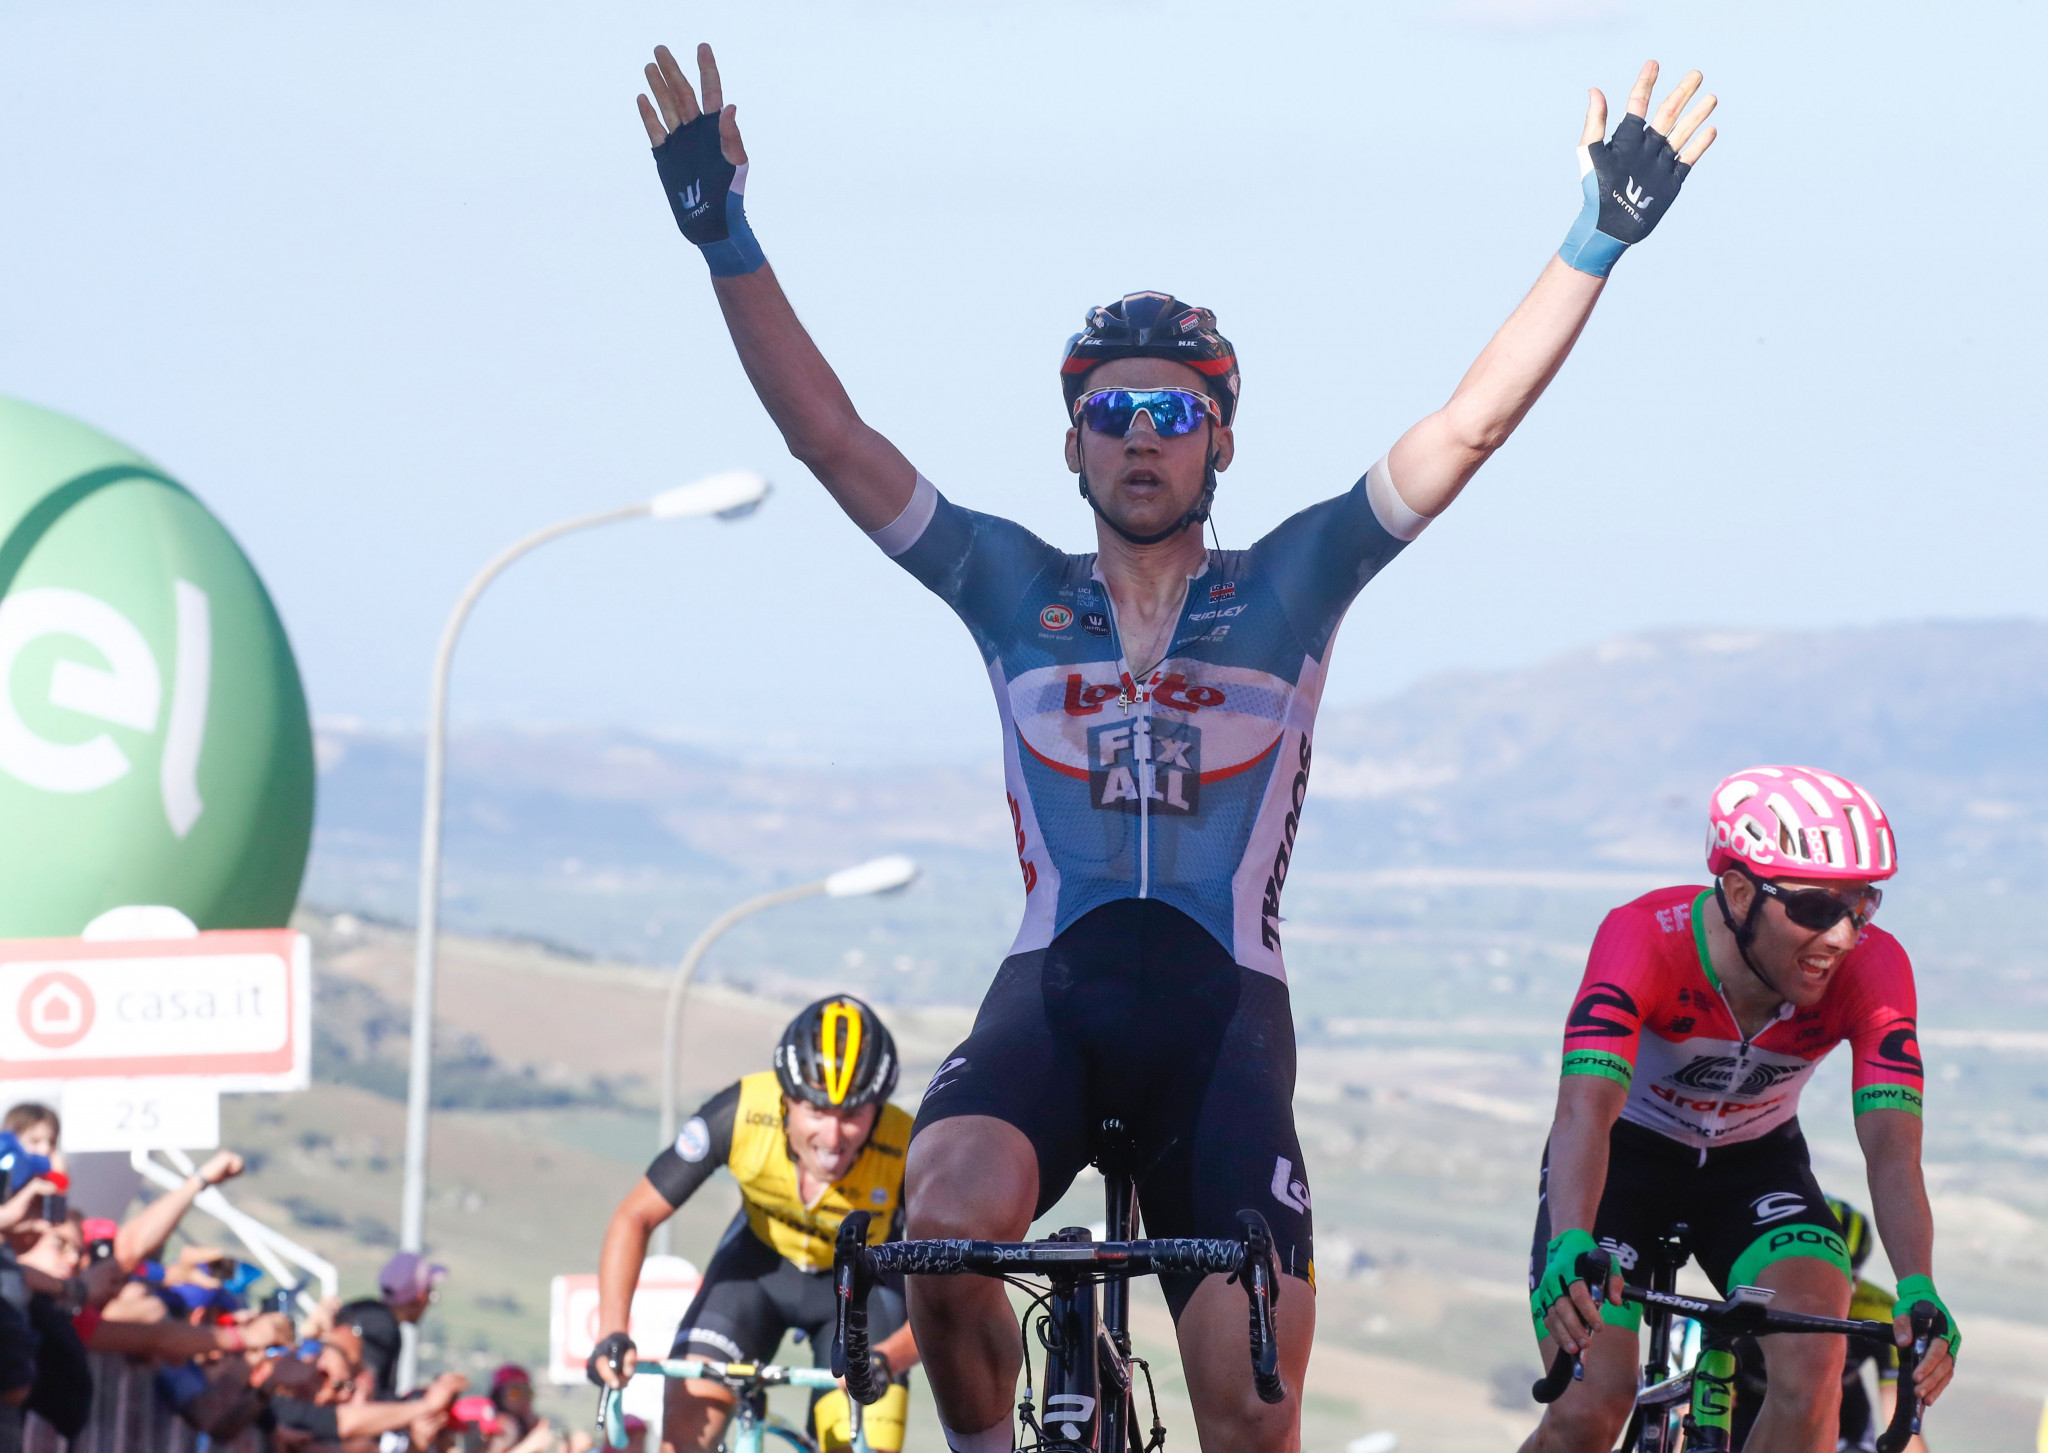 Wellens wins as Giro reaches Italy - but Froome loses ground